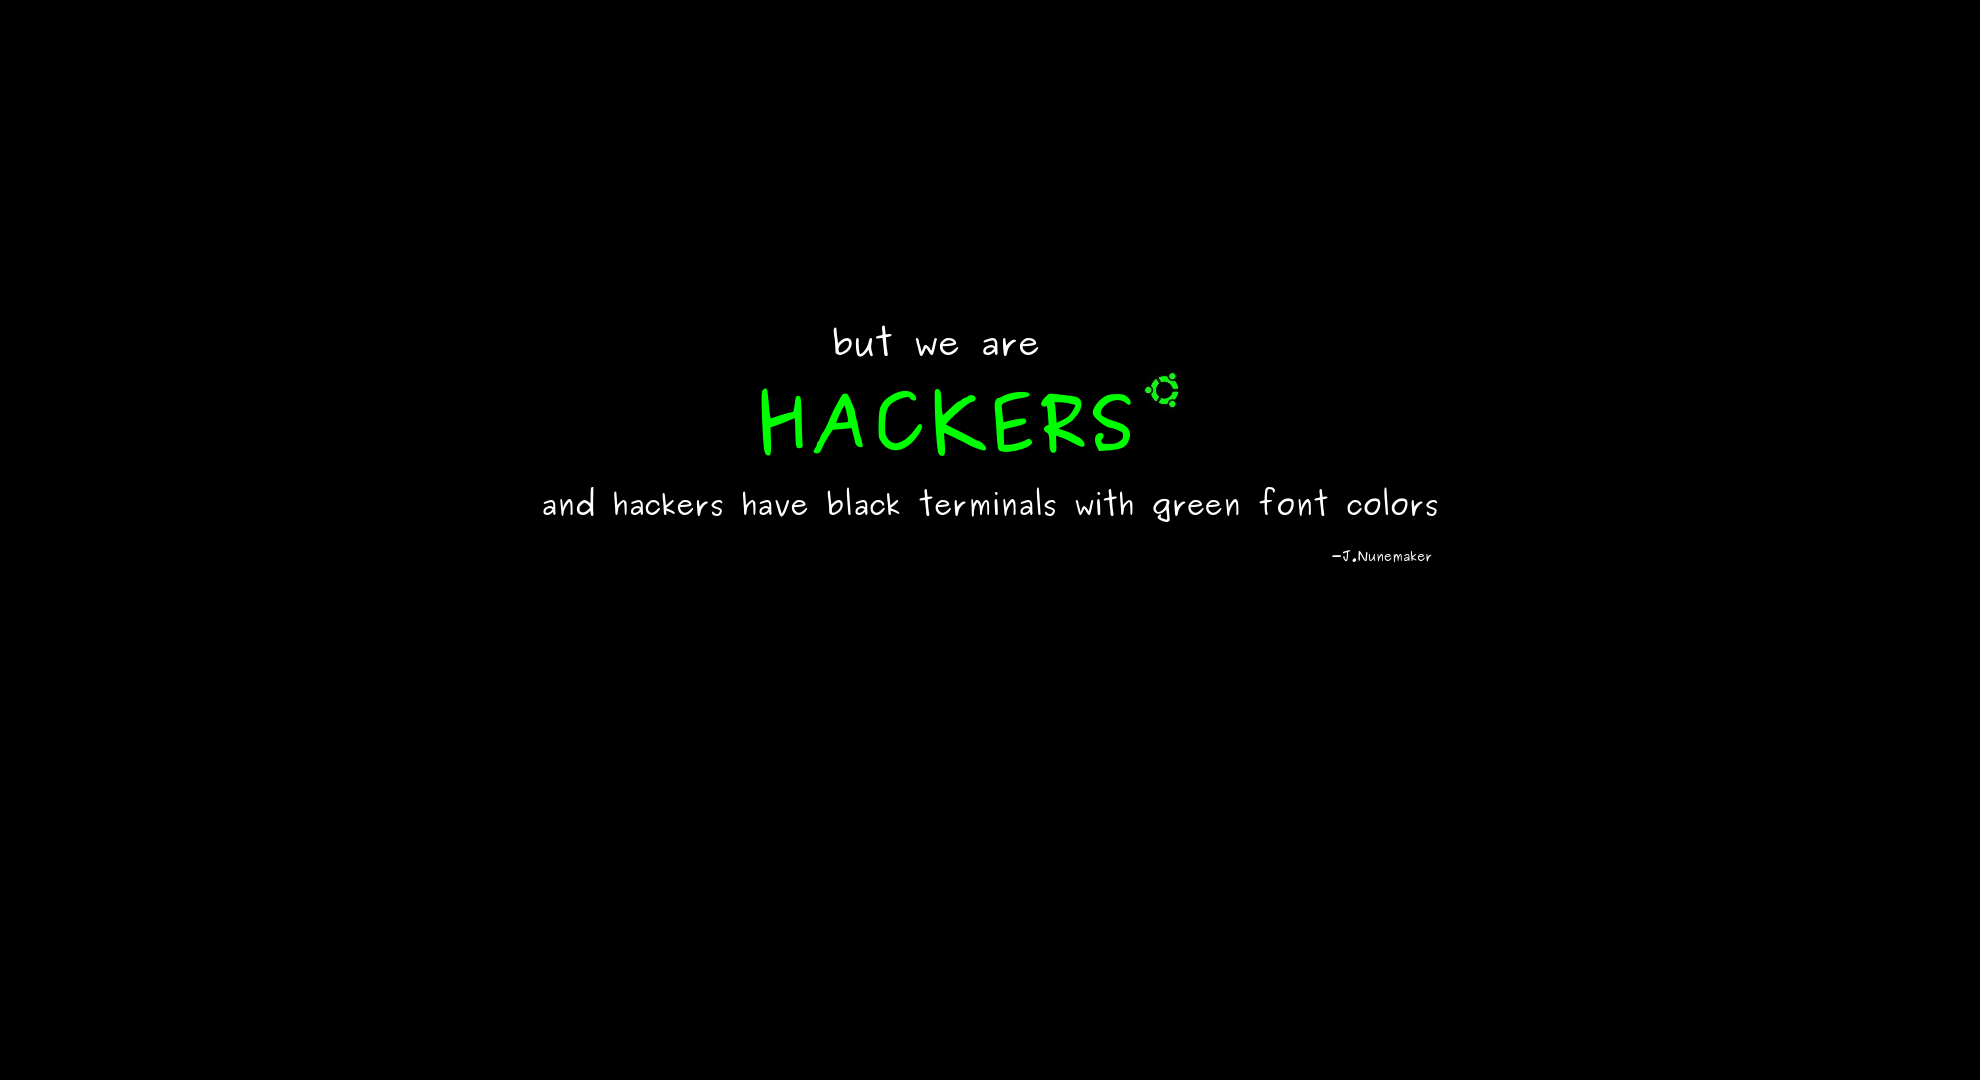 Hackers Wallpaper. Hackers Background and Image (39)